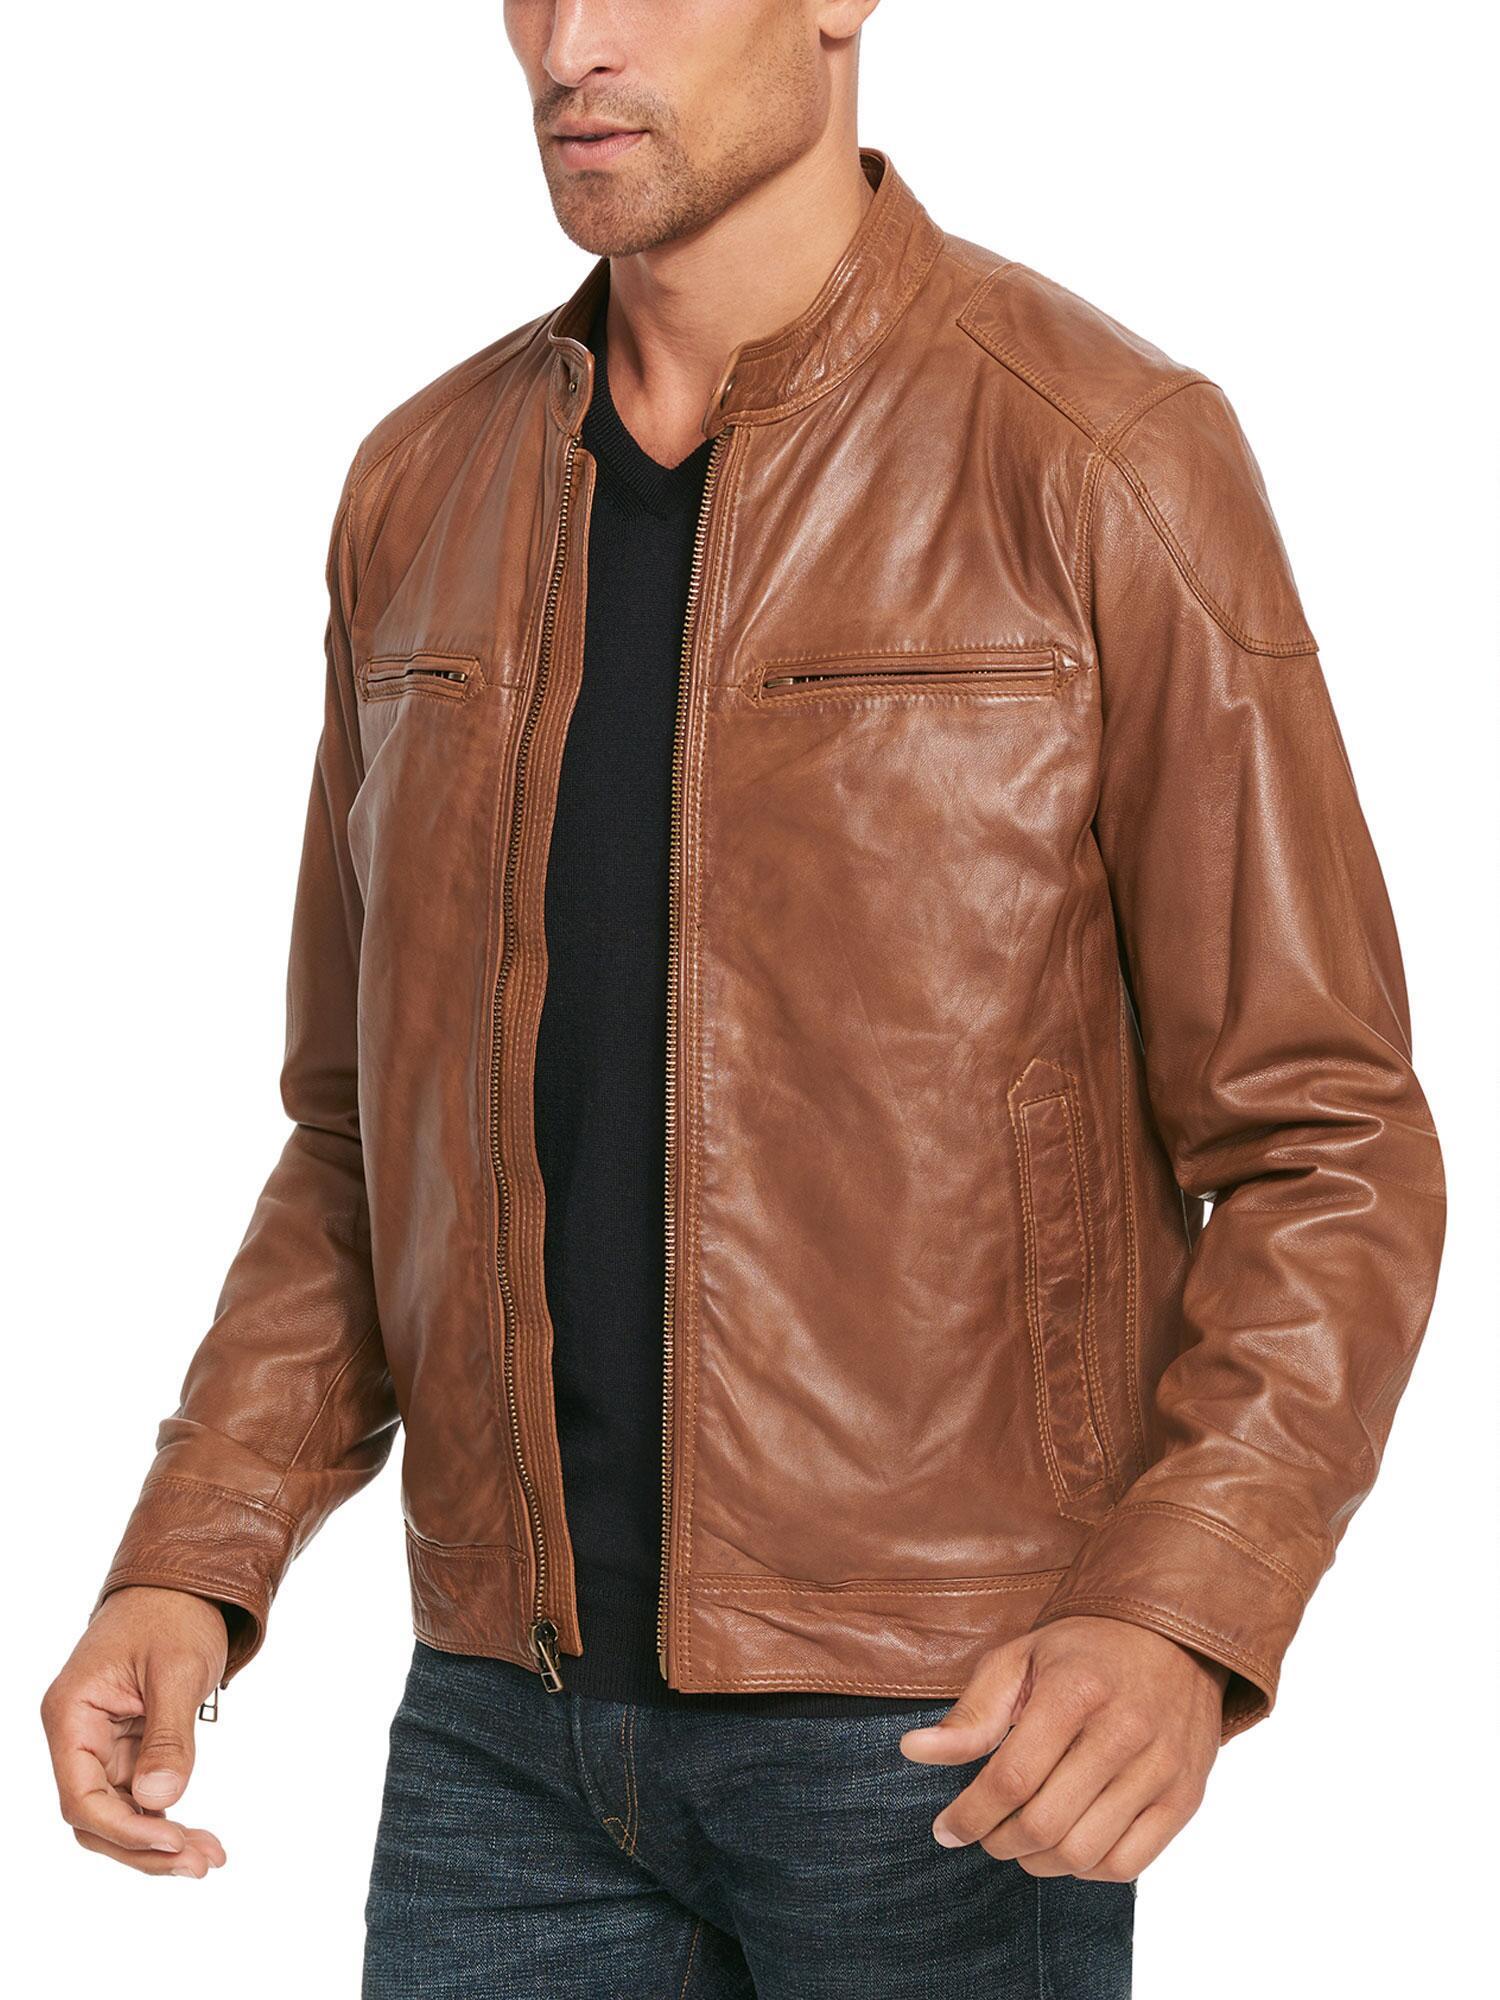 Wilsons Leather Leather Jacket With Shoulder Patches in Cognac (Brown